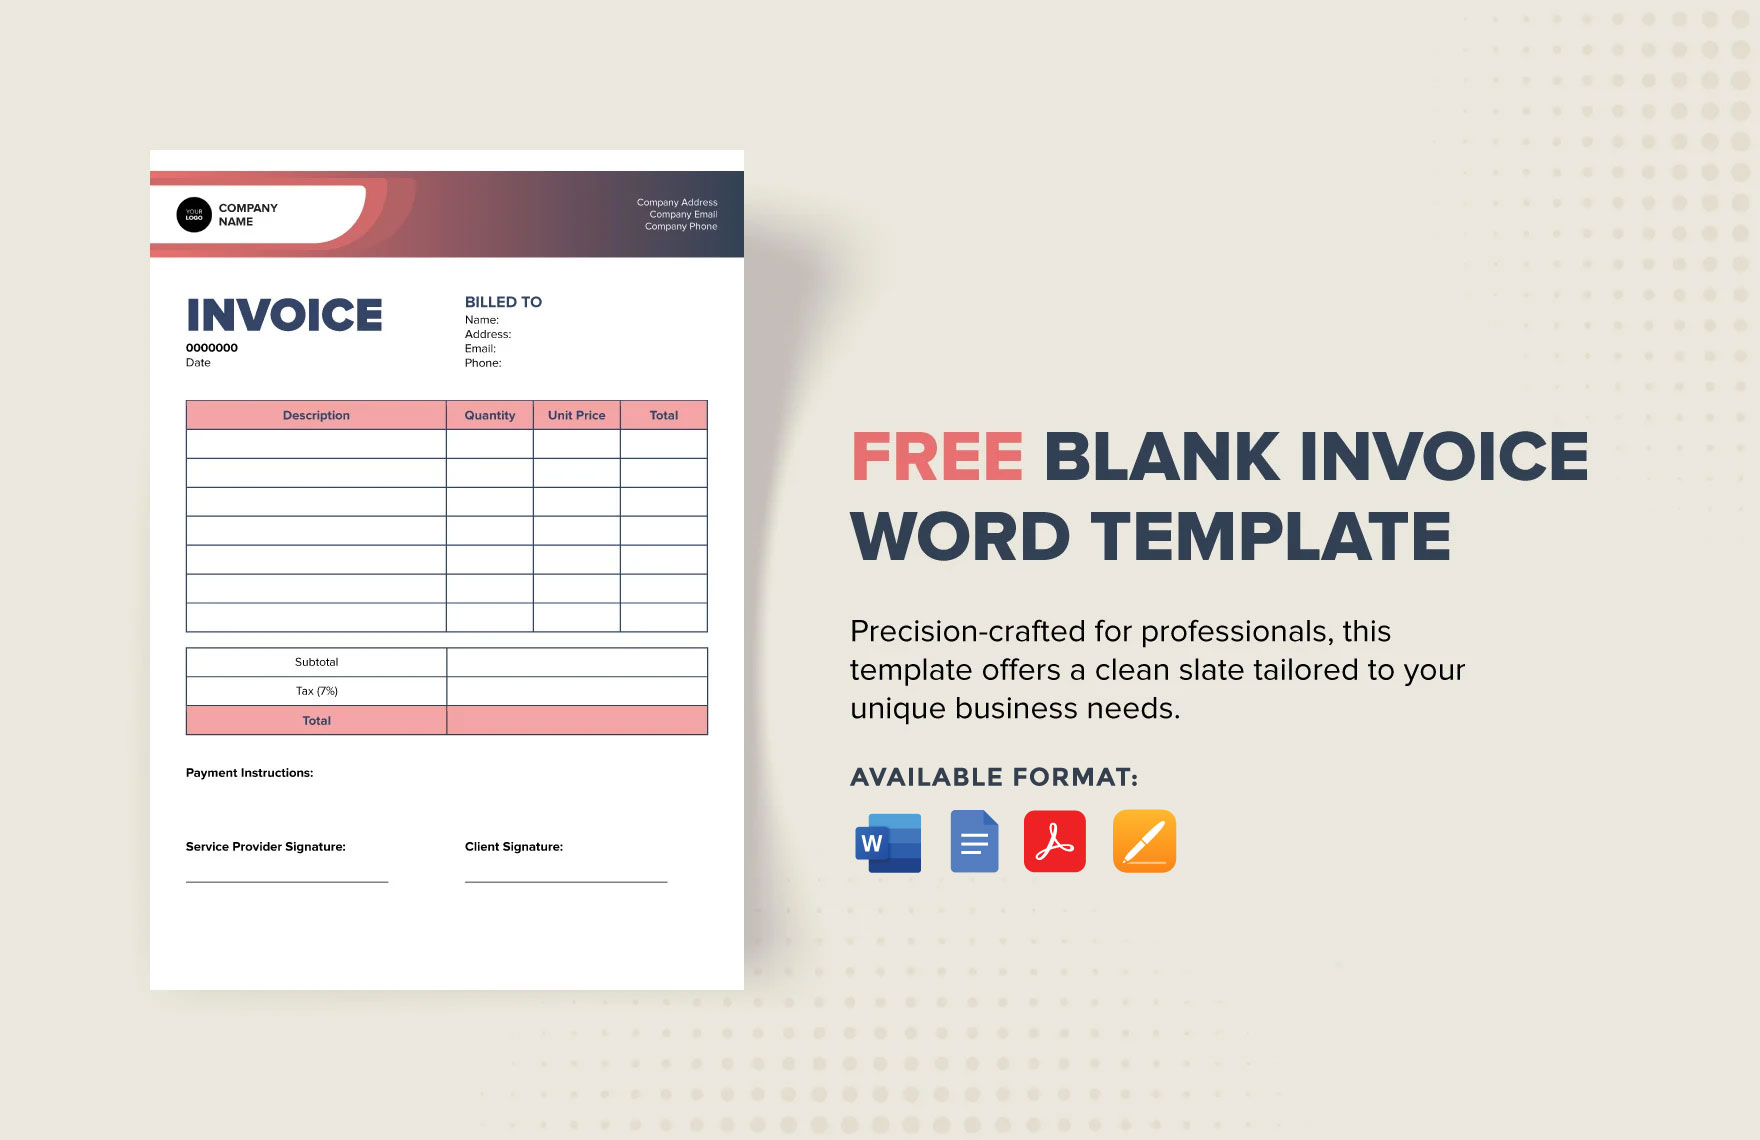 Blank Invoice Word Template